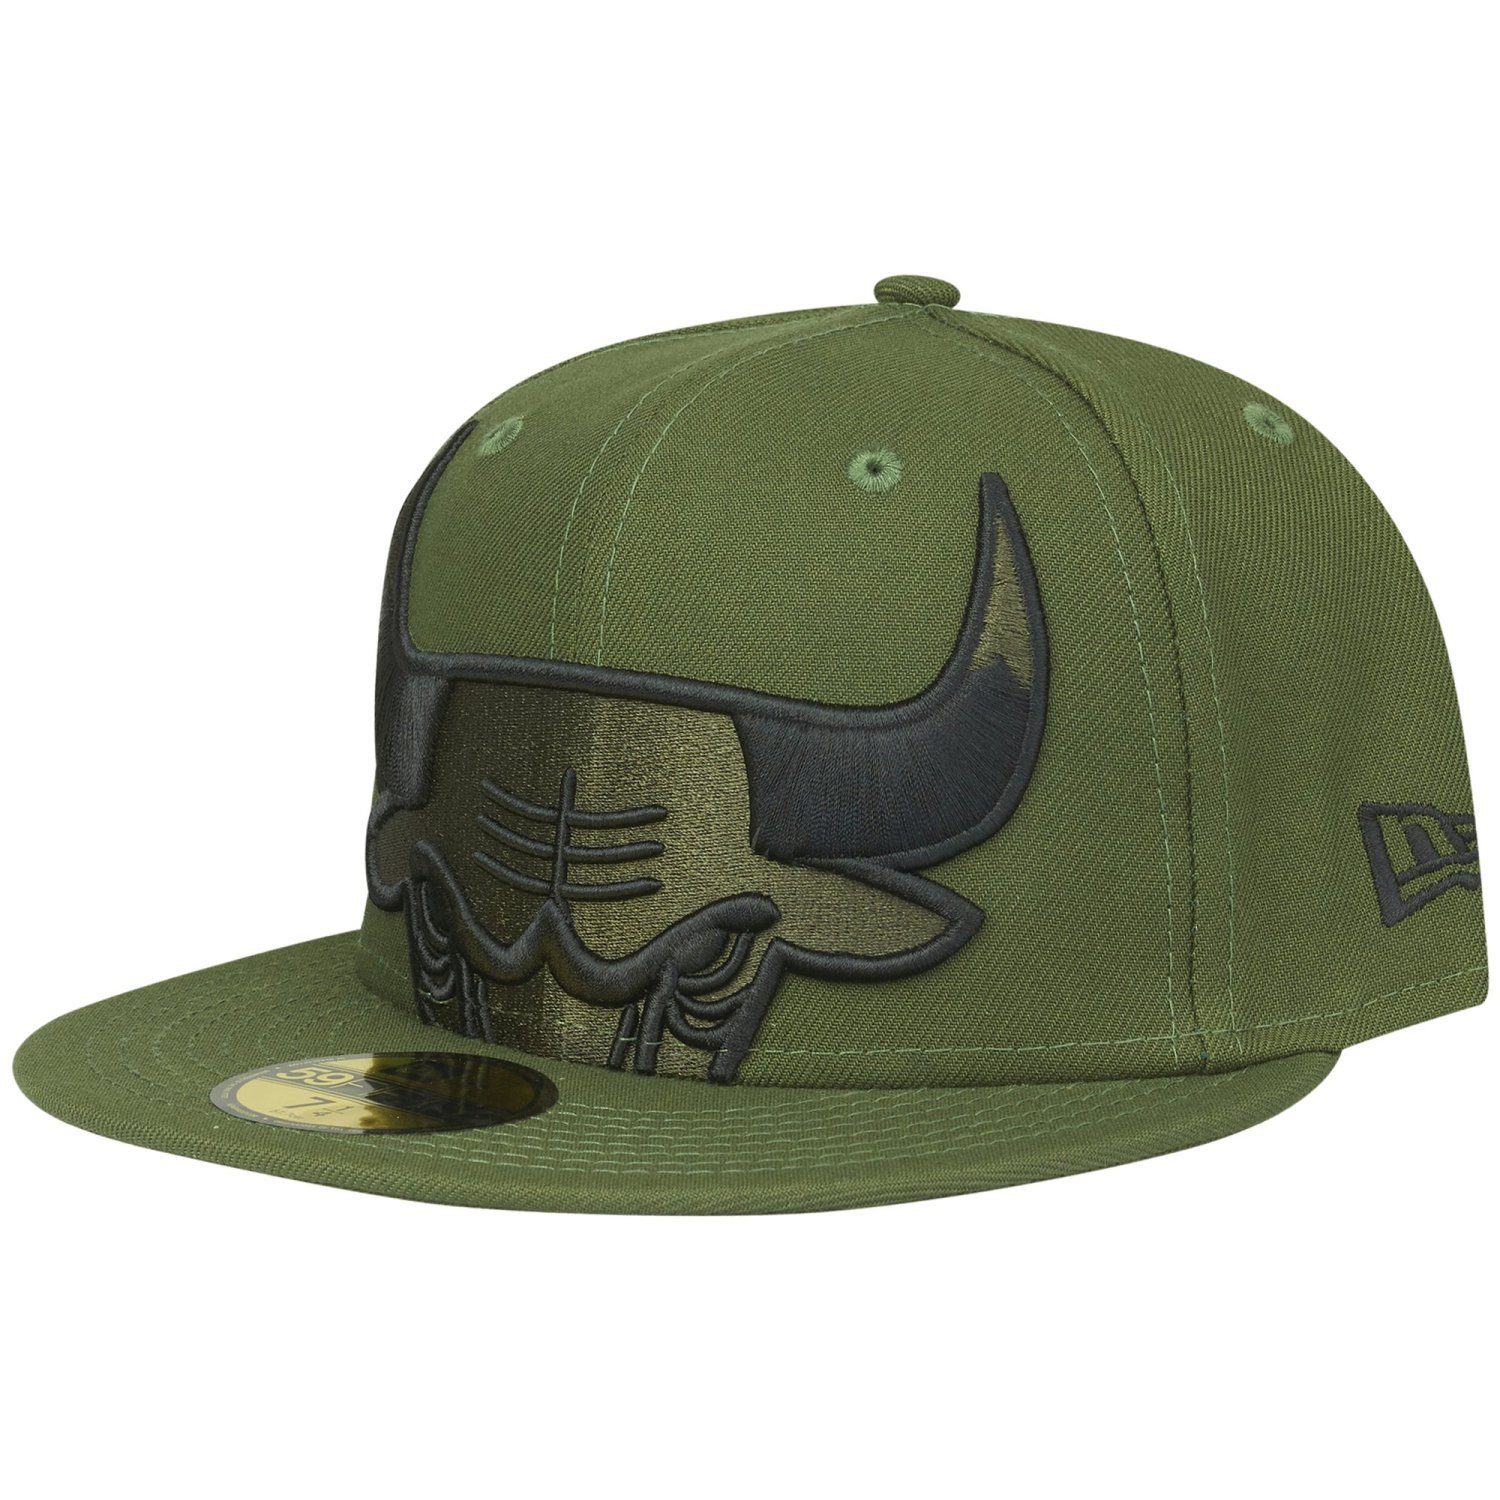 New Era Fitted Cap olive Chicago 59Fifty Bulls